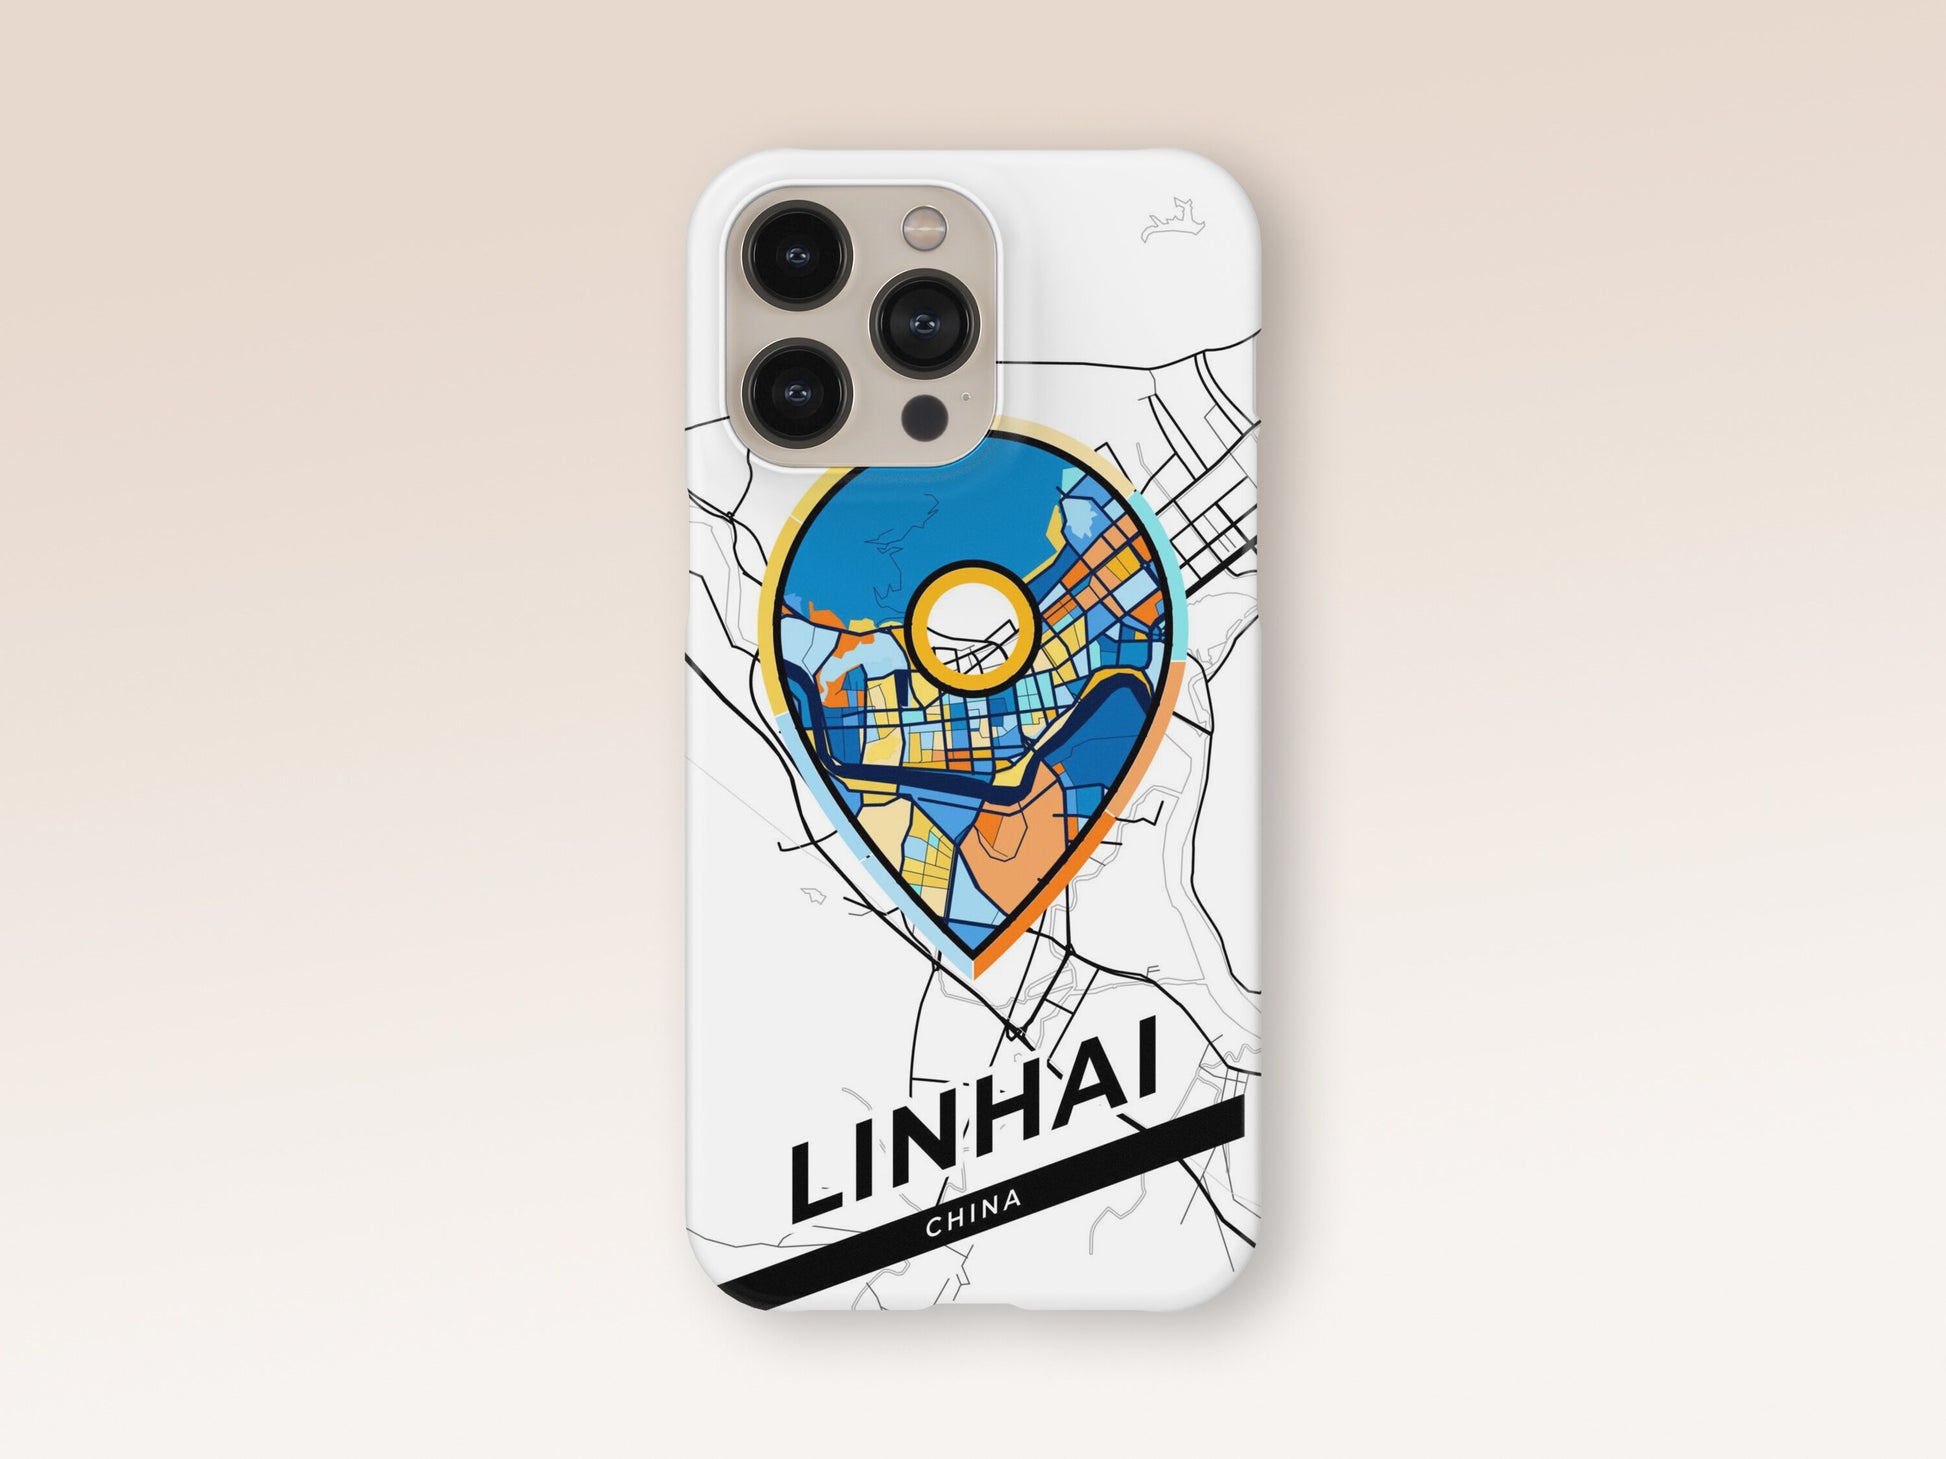 Linhai China slim phone case with colorful icon. Birthday, wedding or housewarming gift. Couple match cases. 1